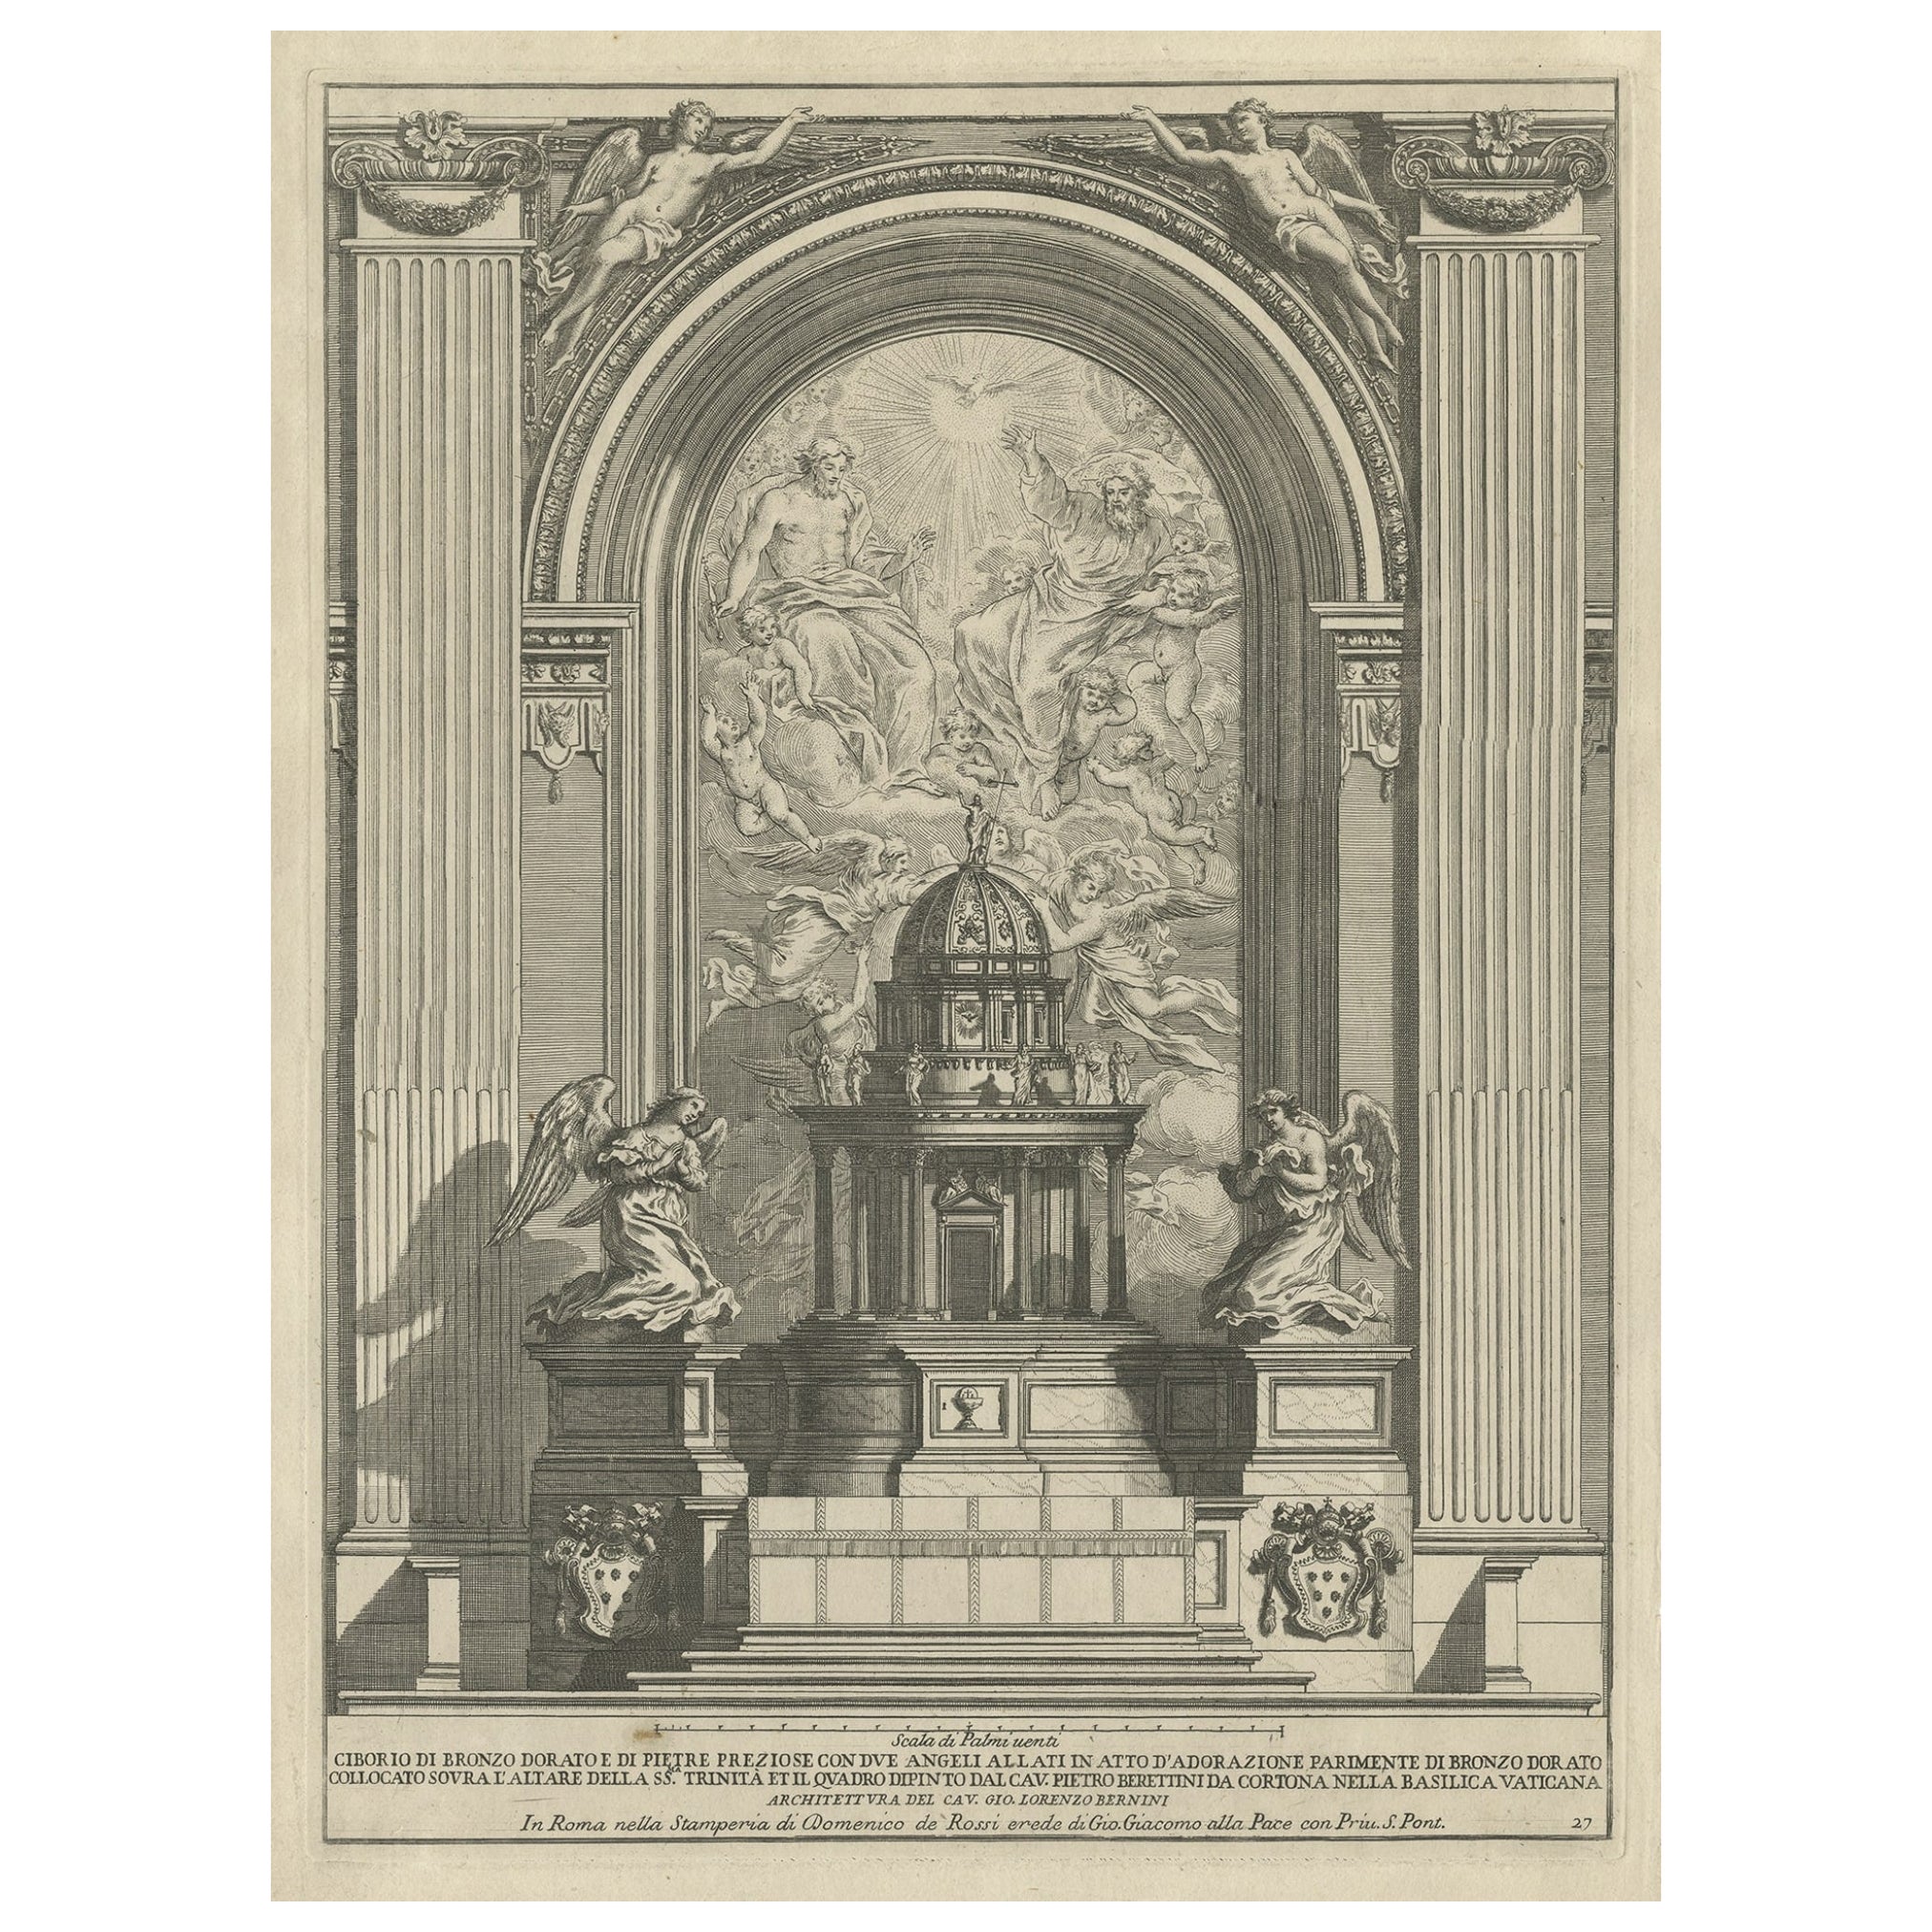 Old Print of the Papal Altar, Located in St. Peter's Basilica, the Vatican, 1710